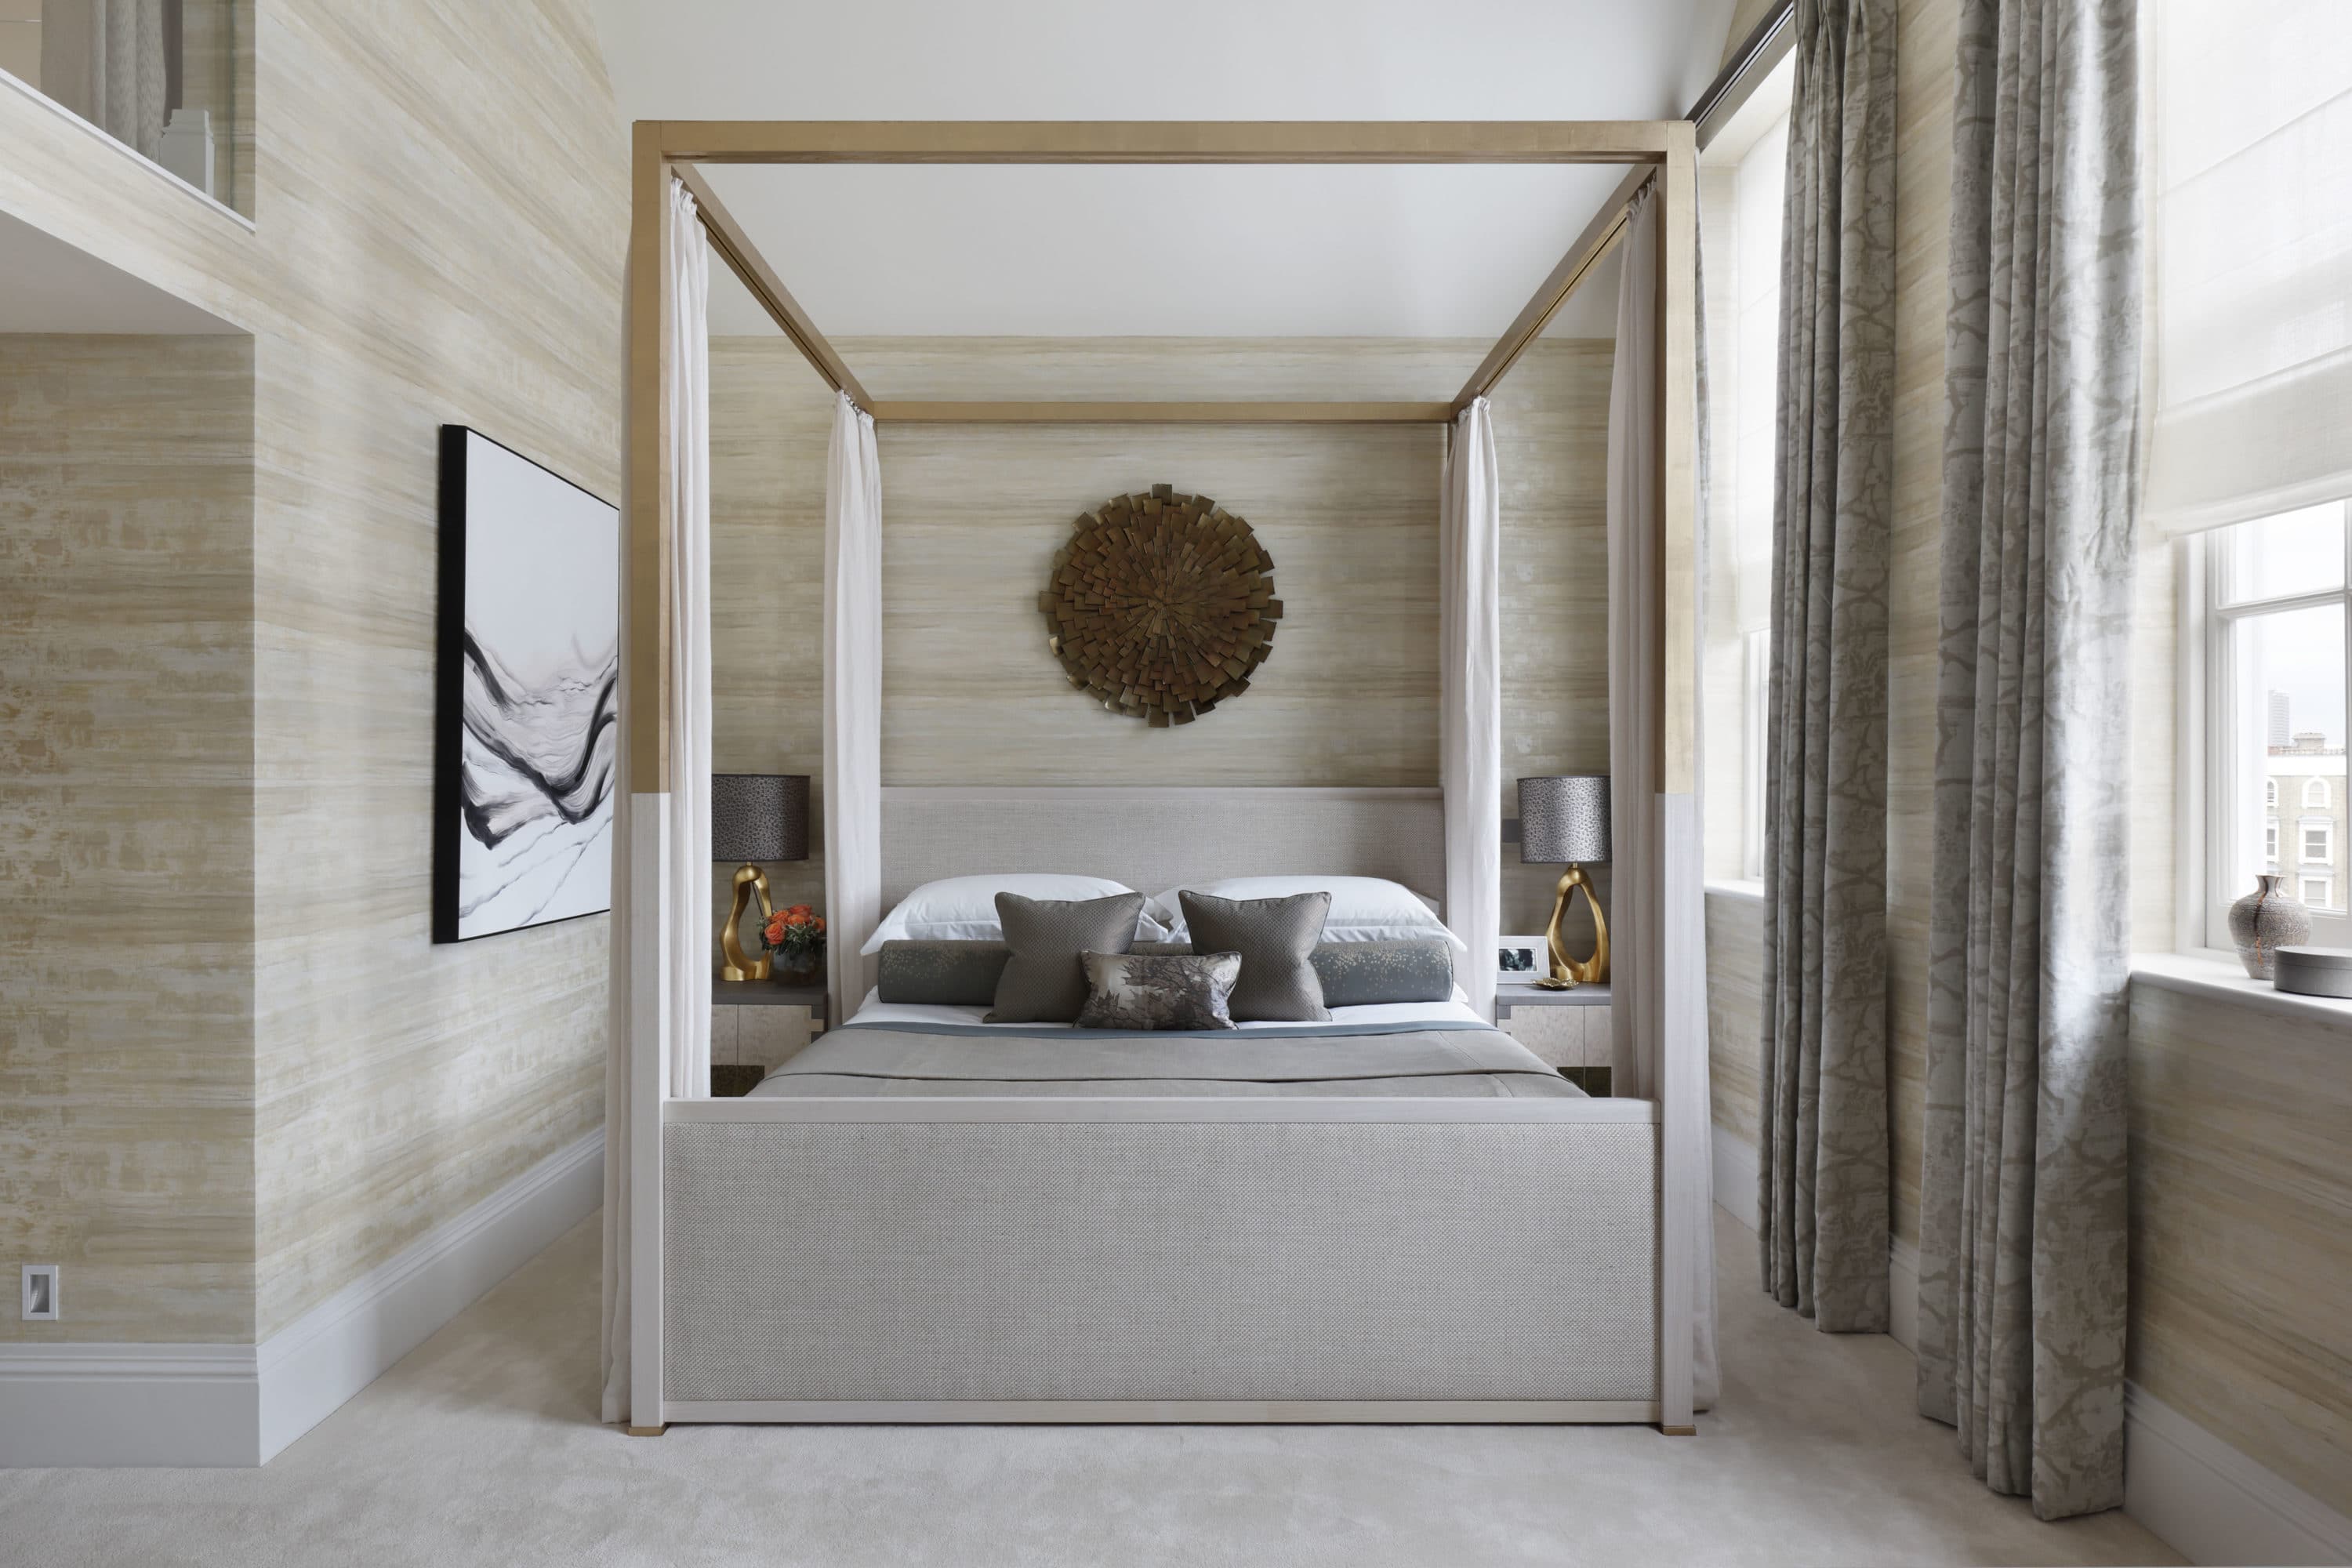 Four poster bed and textured wallpaper